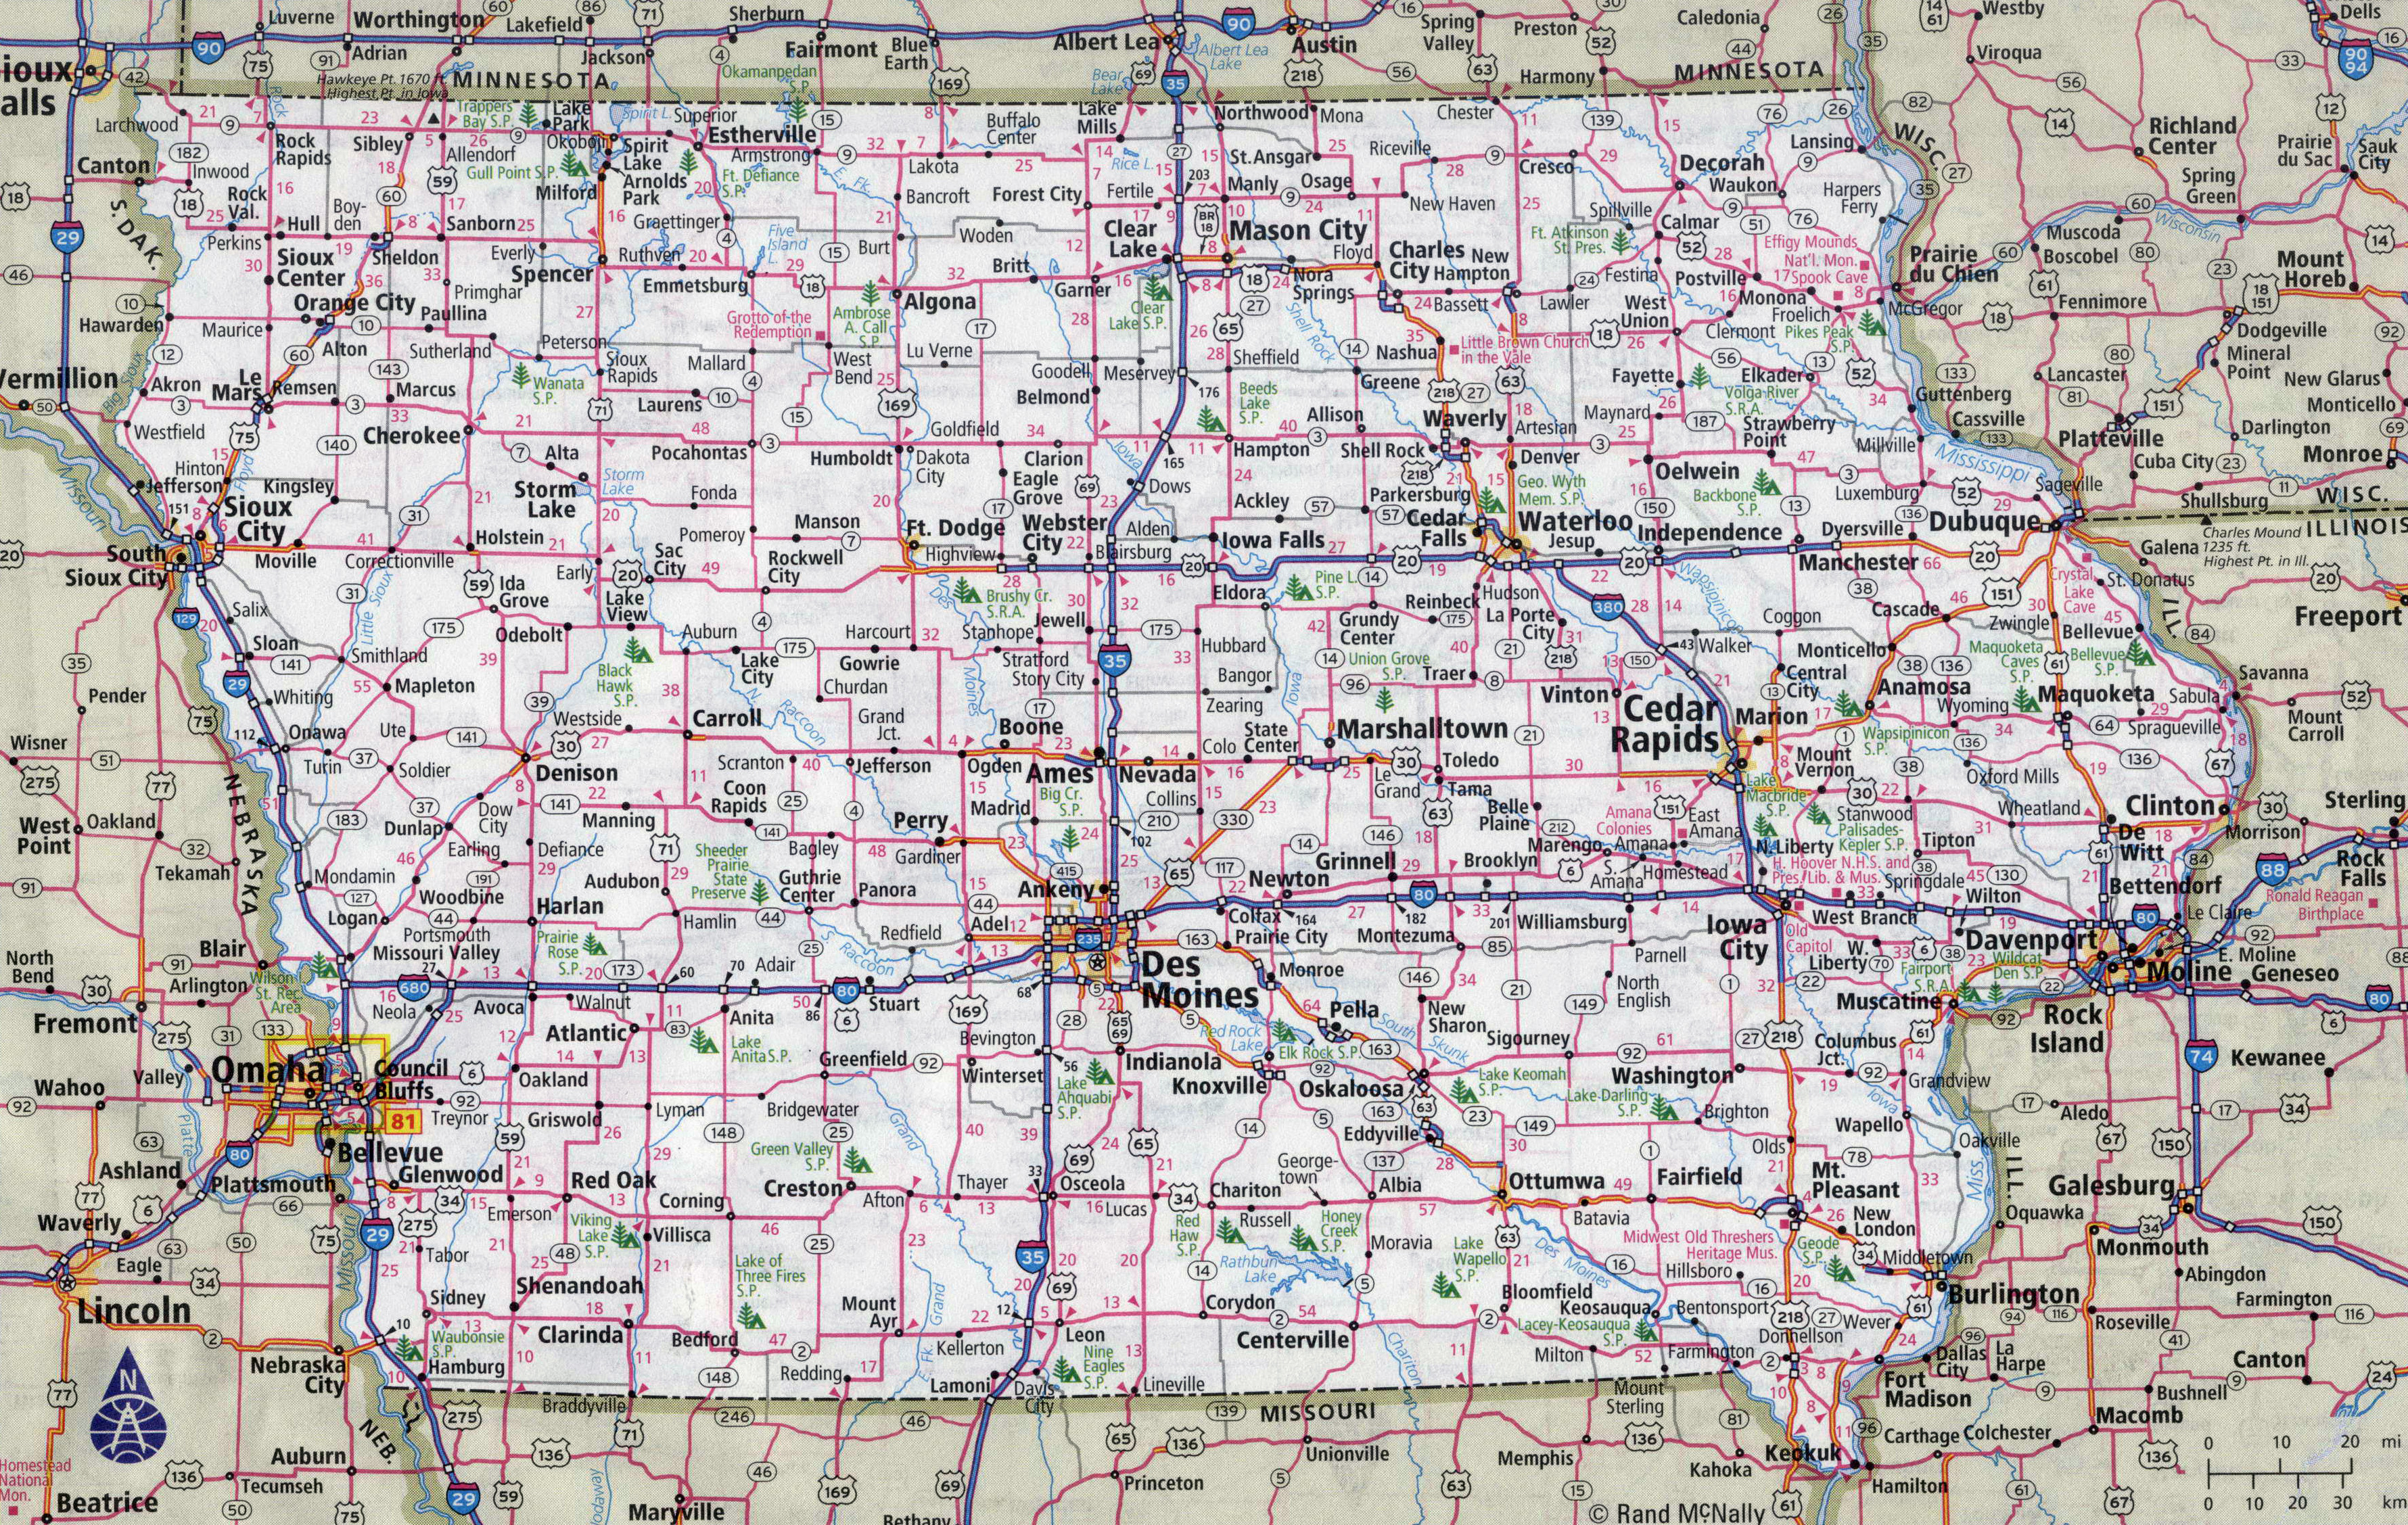 large-detailed-roads-and-highways-map-of-iowa-state-with-all-cities